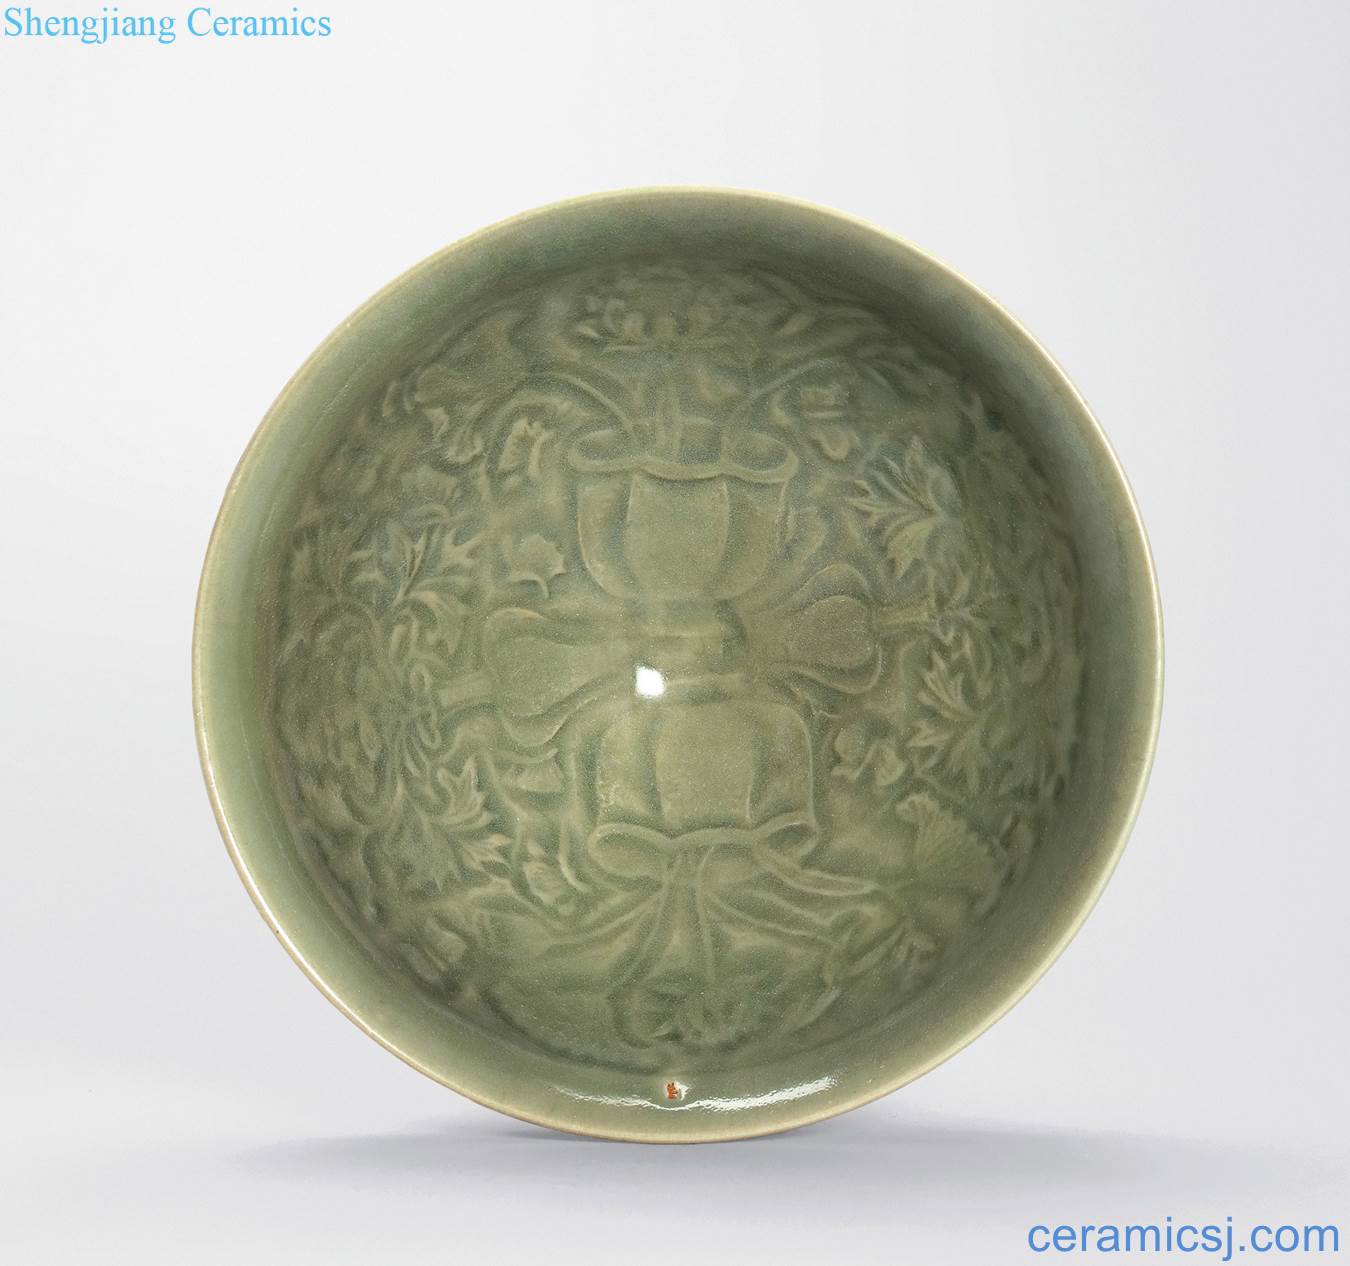 Northern song dynasty (960-1127) and gold (1115-1234), yao state kiln green glaze stamps antique flower green-splashed bowls